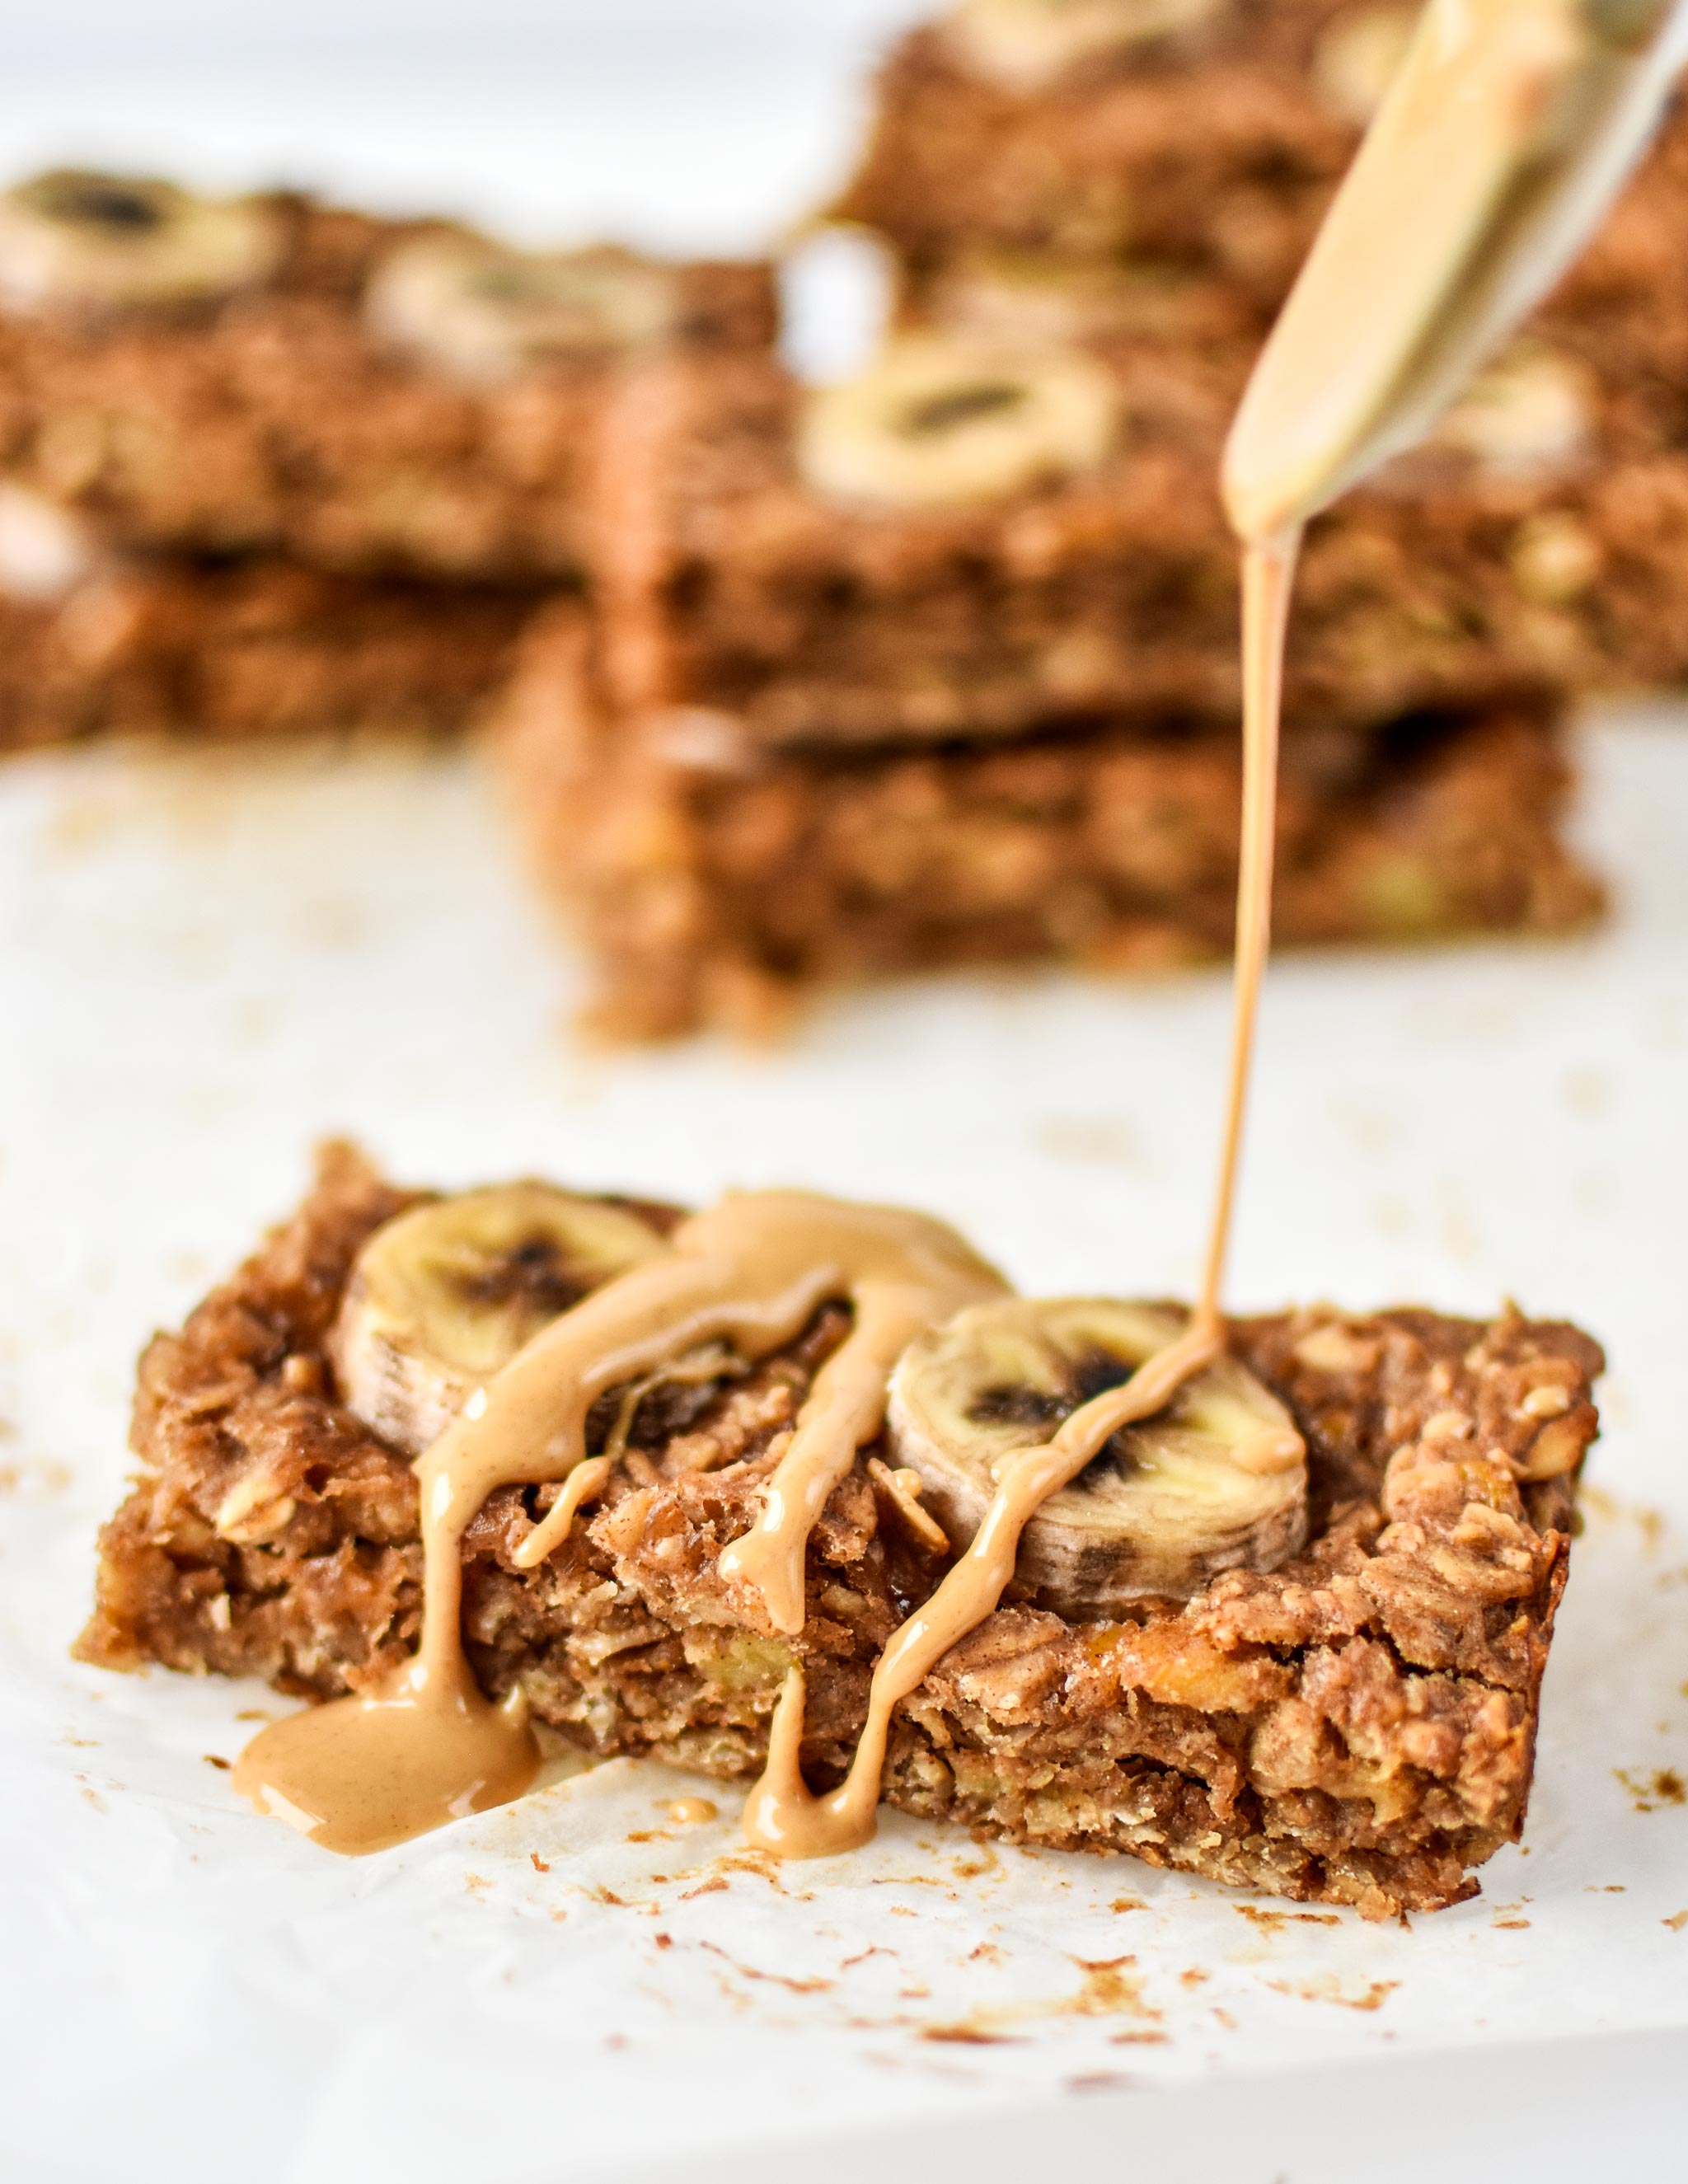 PB Banana Oatmeal Breakfast Bars drizzled with peanut butter